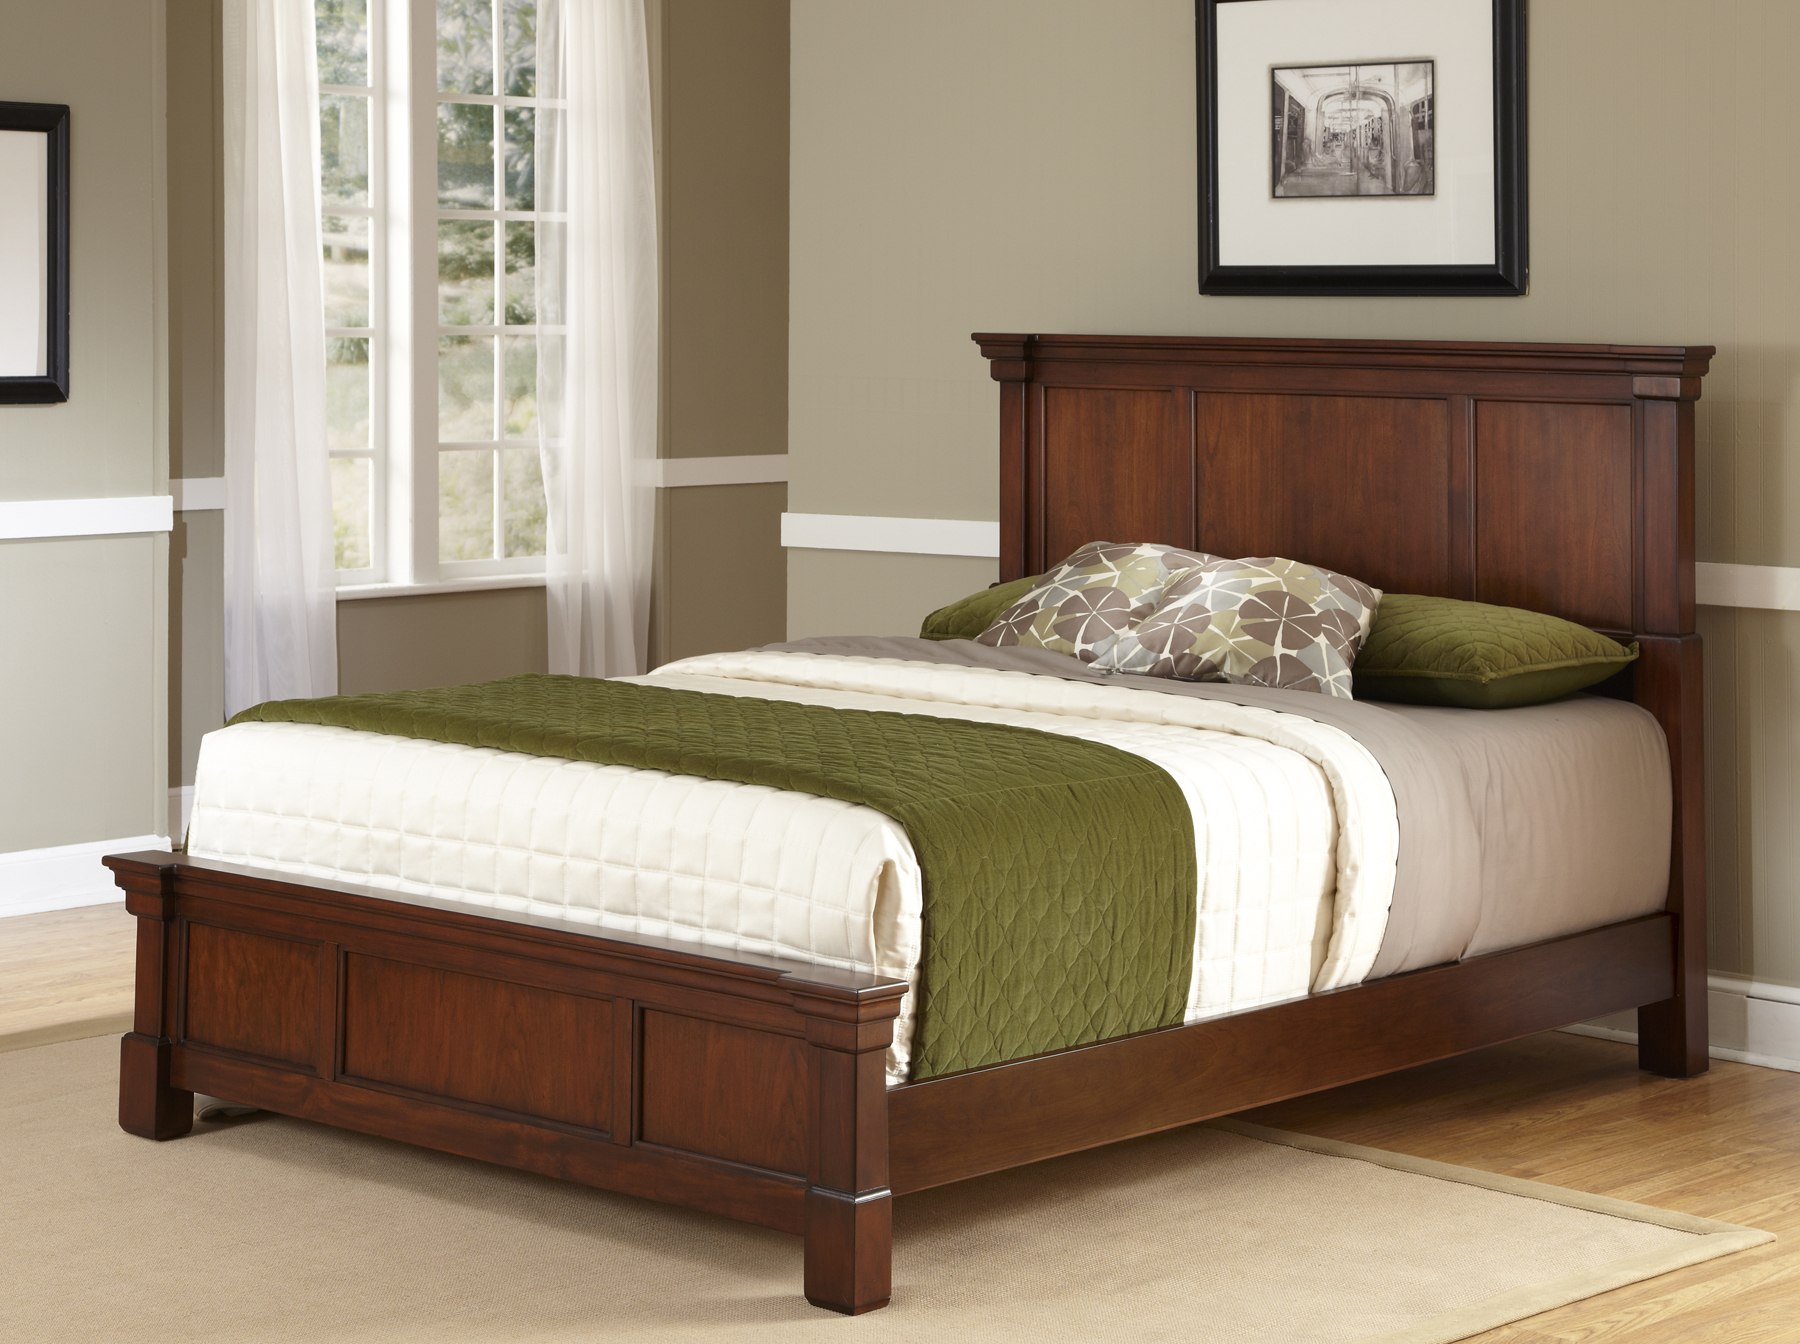 Home Styles The Aspen Collection Queen Bed